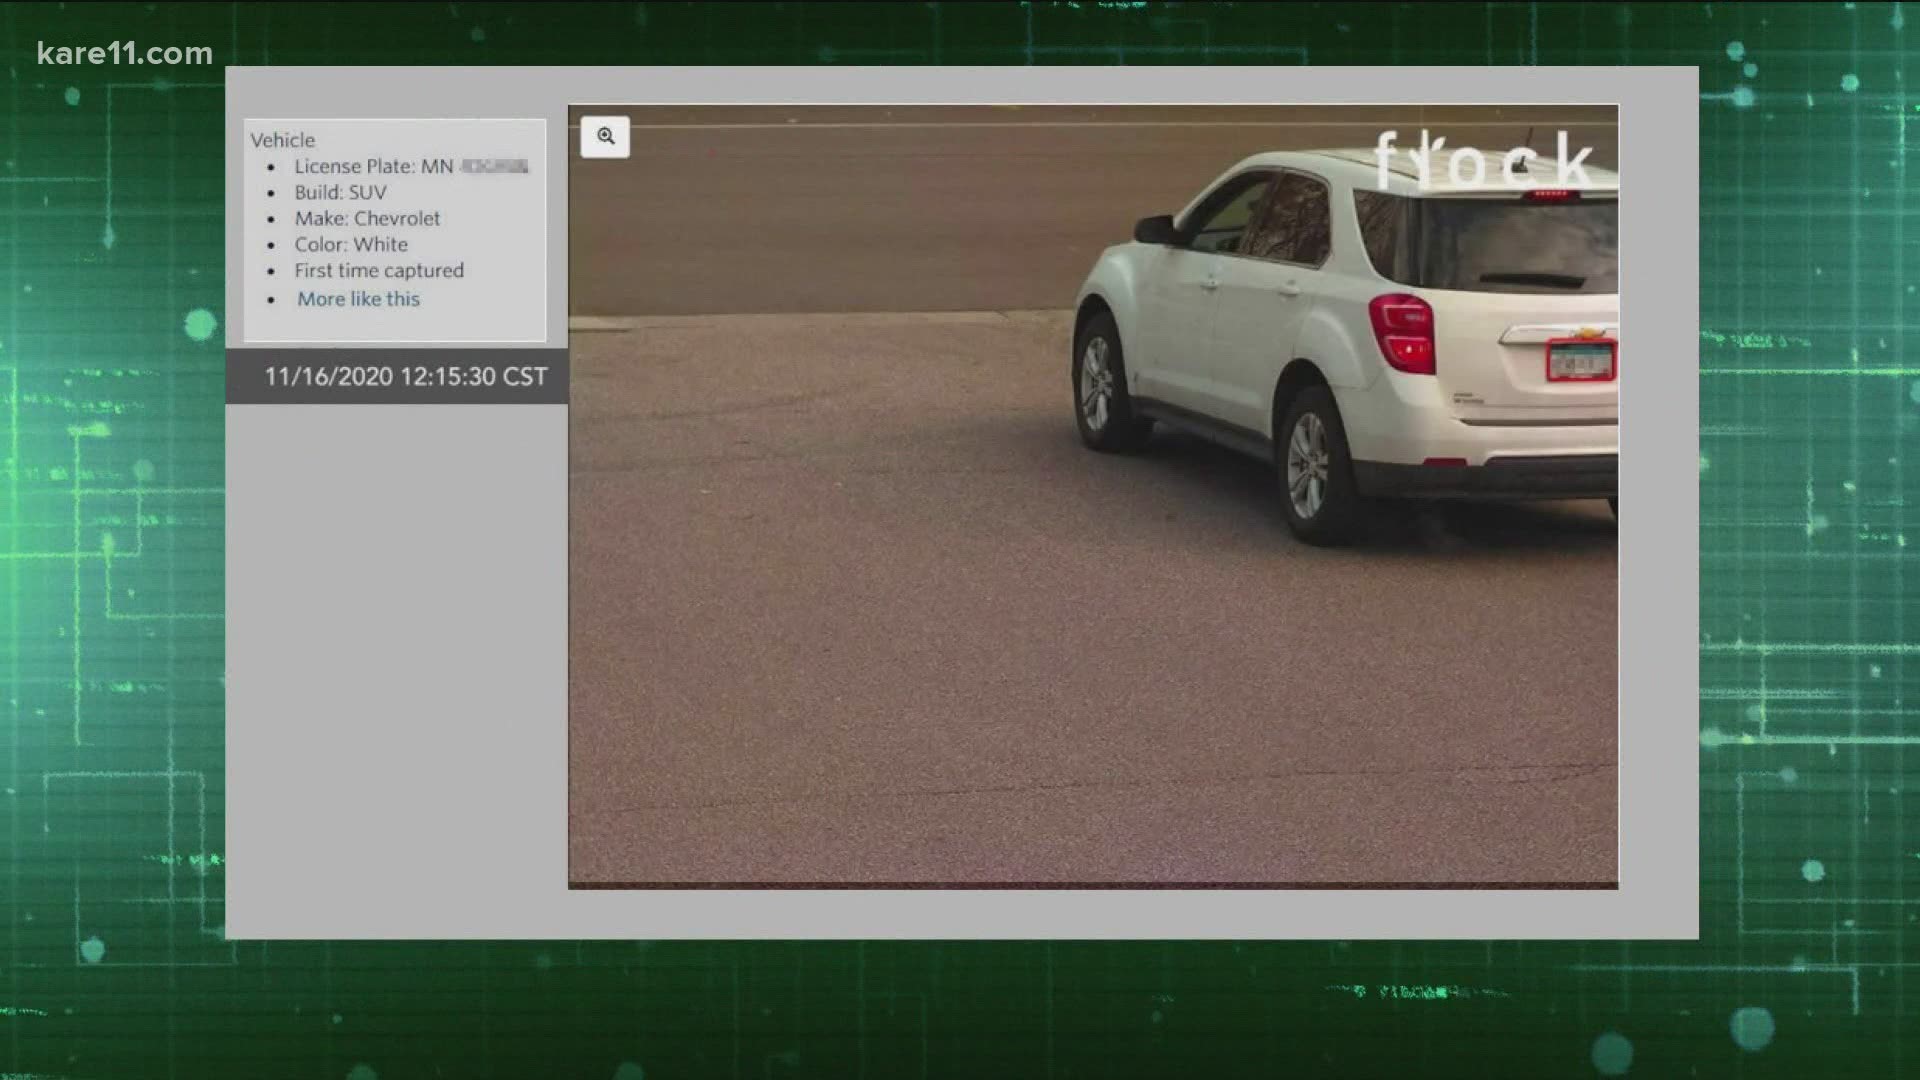 A Minnesota neighborhood decided to invest in a license plate reader in order to increase safety in their community.